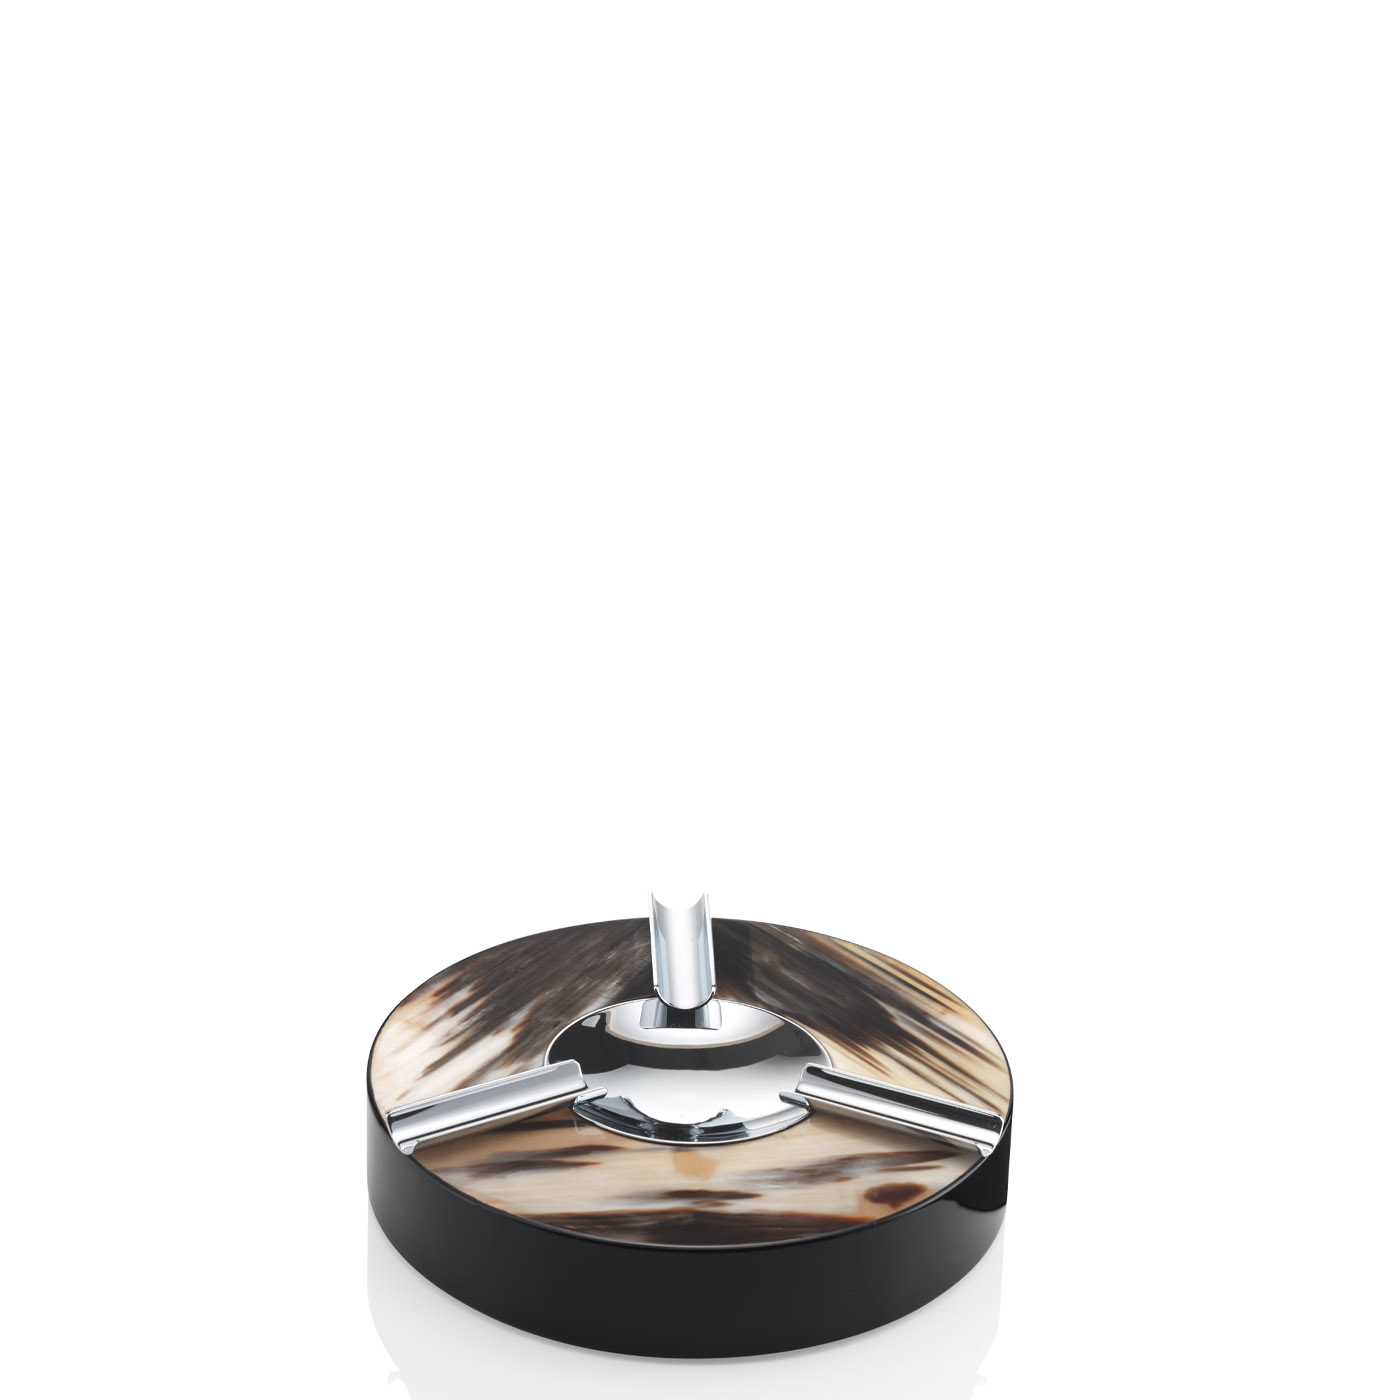 Office sets and smoking accessories - Clinio ash tray in horn and glossy black lacquered wood - Arcahorn